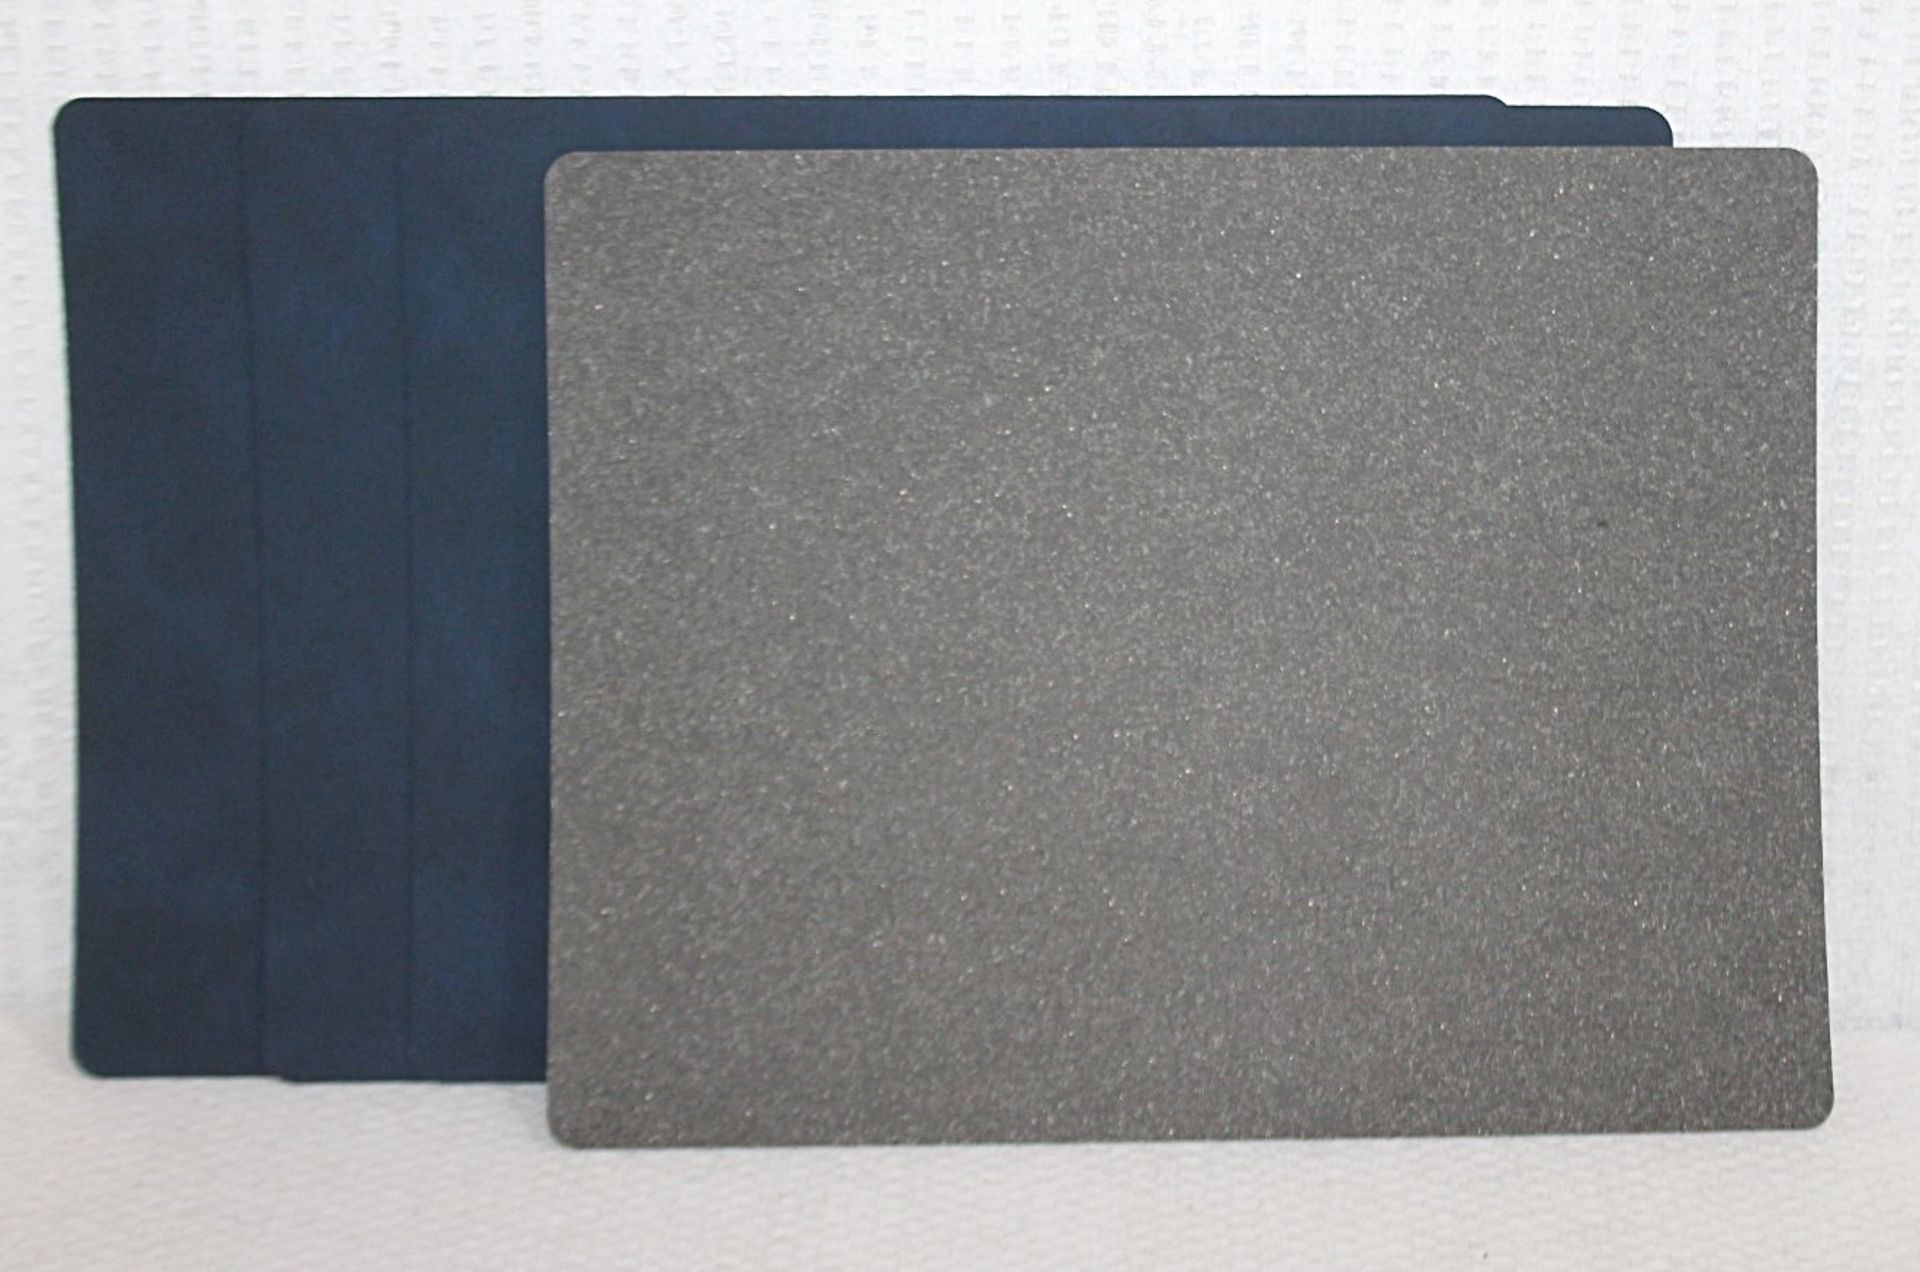 Set Of 4 x LINDDNA Recycled Leather Rectangular Placemats In Midnight Blue - Original Price £72.95 - Image 4 of 7